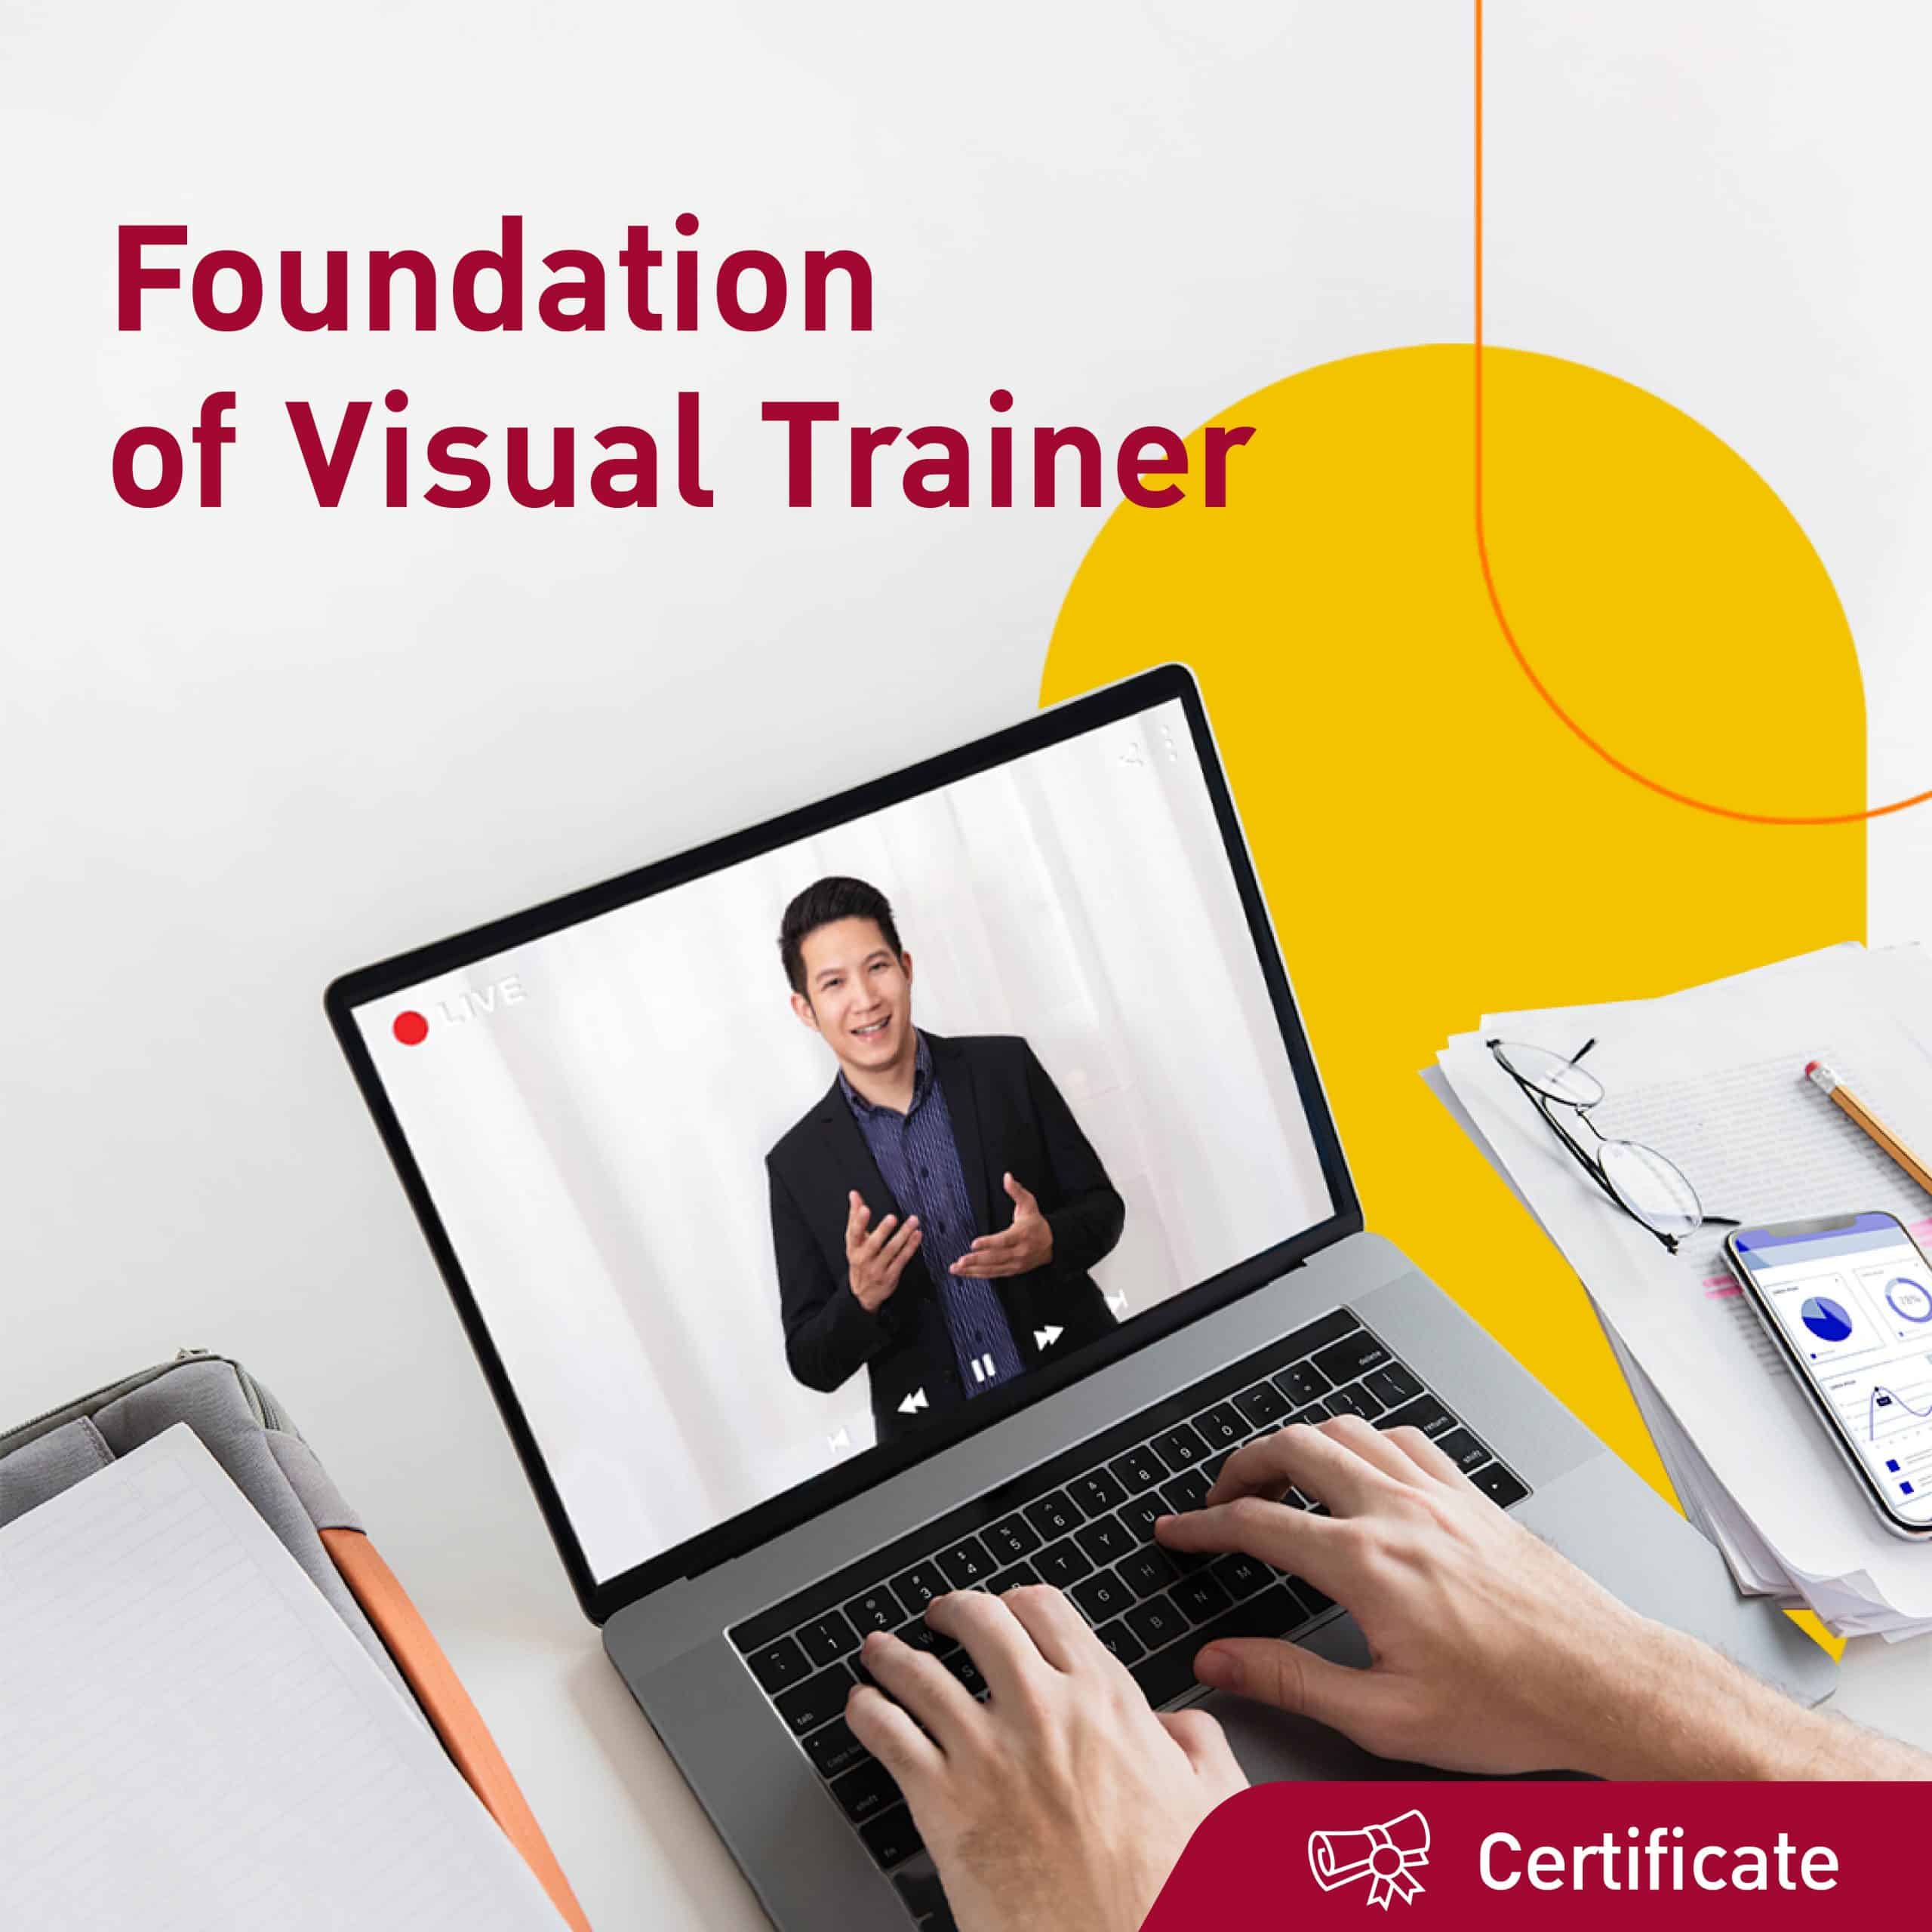 AW_Jobs Base Learning_Foundation of Visual Trainer_1080x1080 (1)